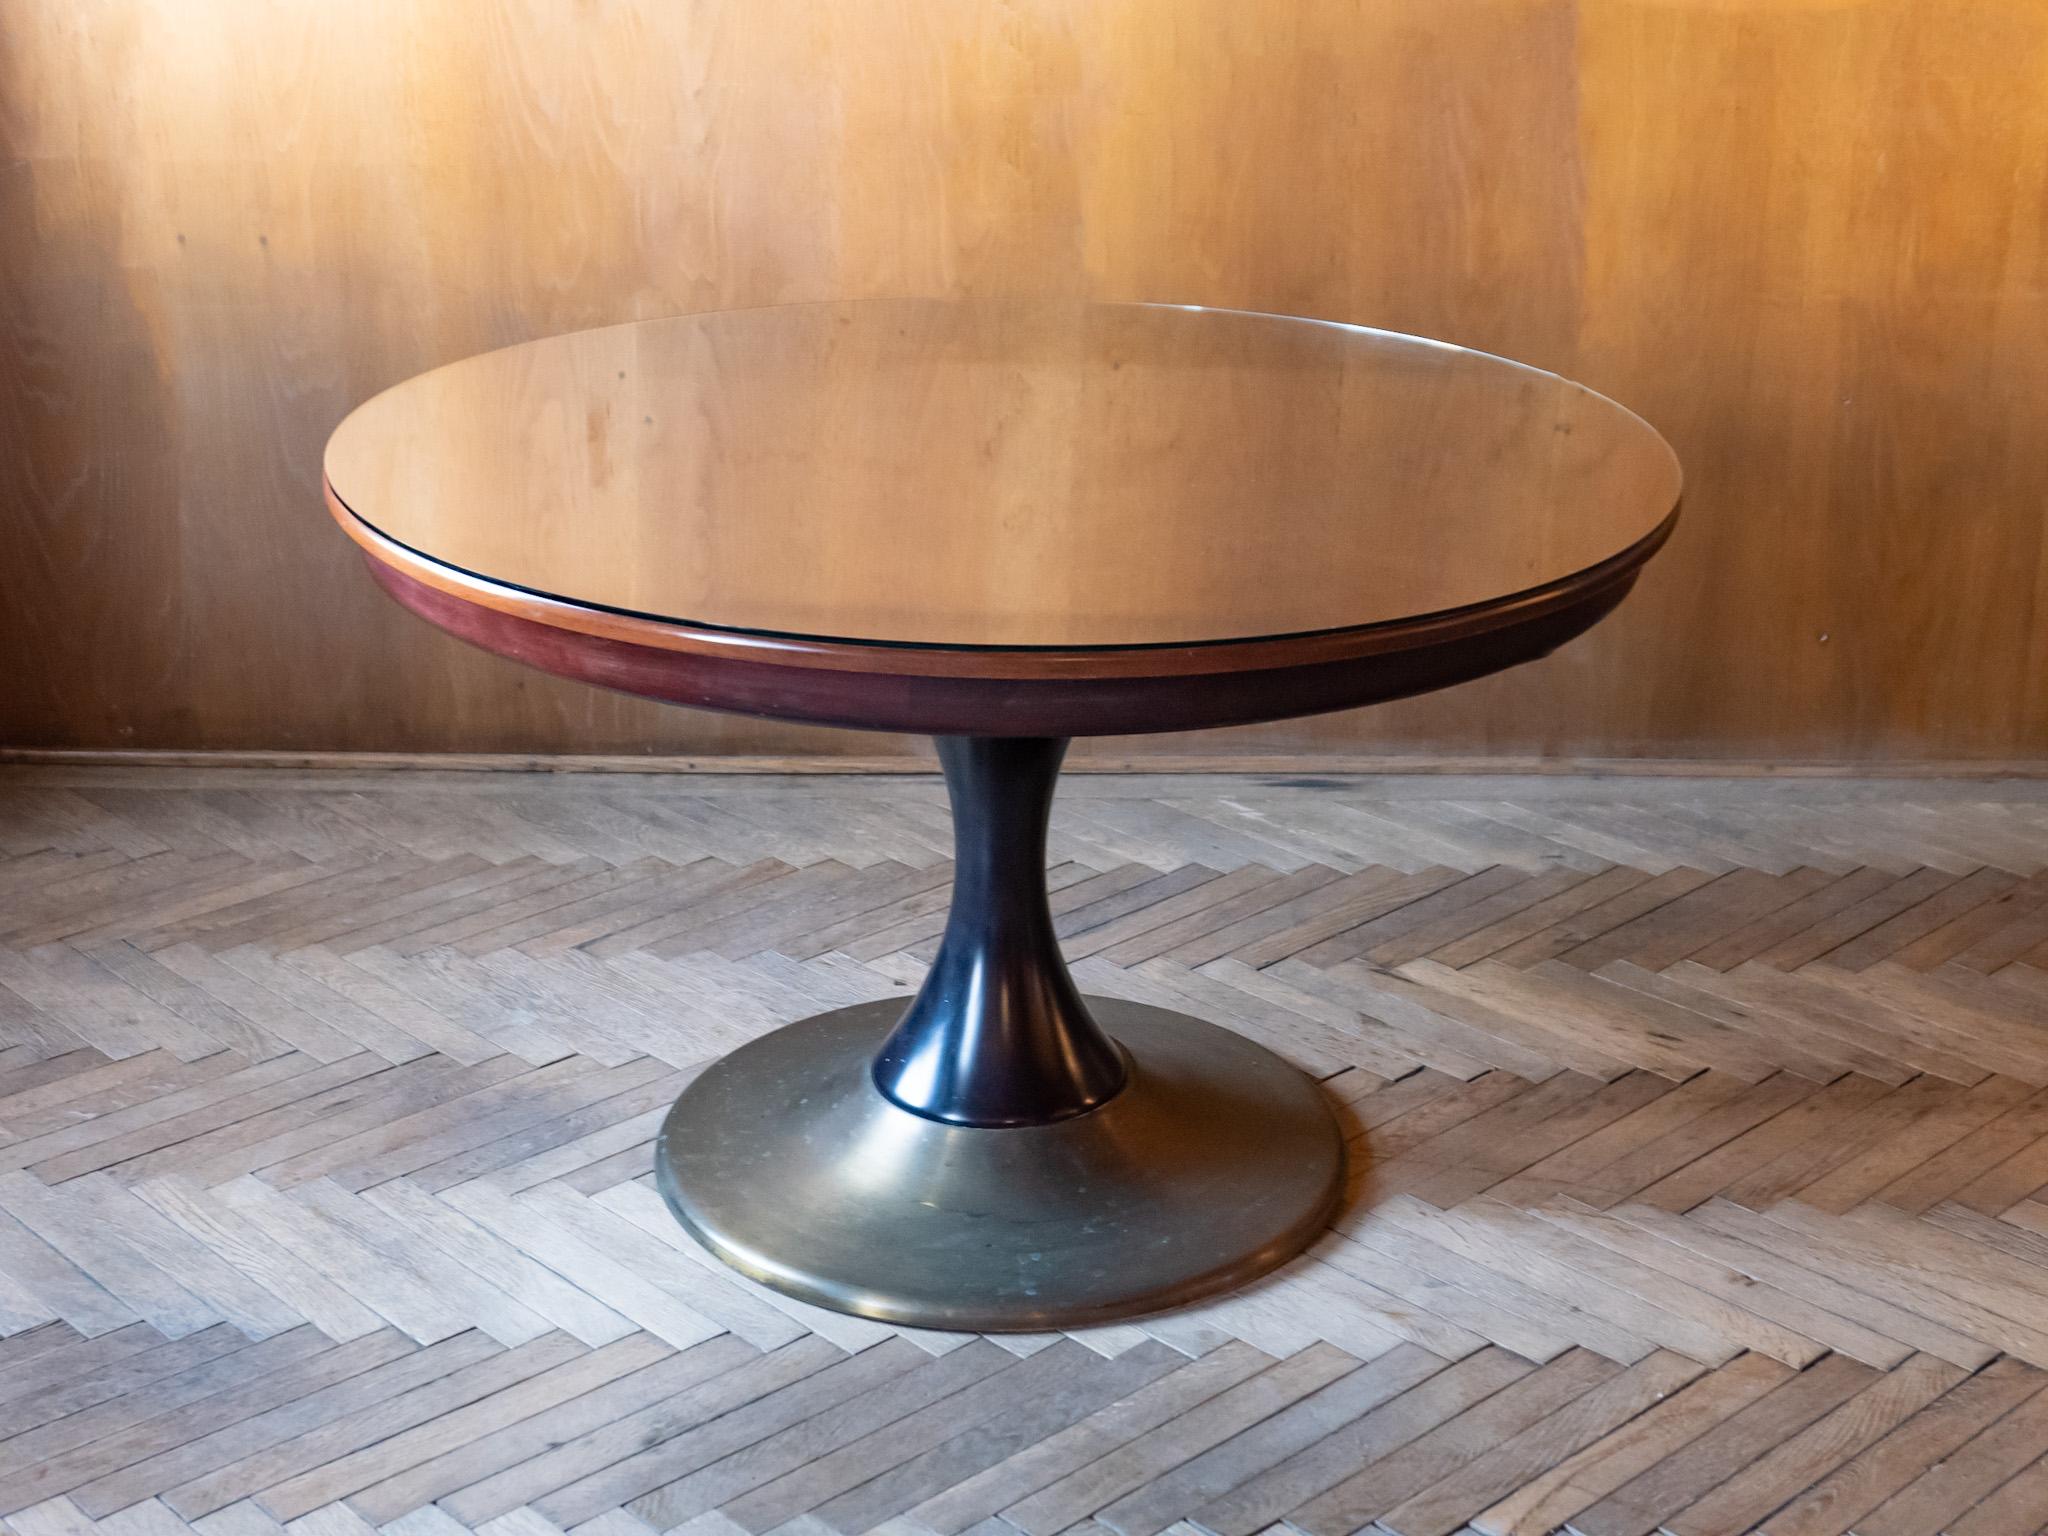 Italian Mid-Century Modern Round Wooden Brass Dining Table, Italy, 1950s For Sale